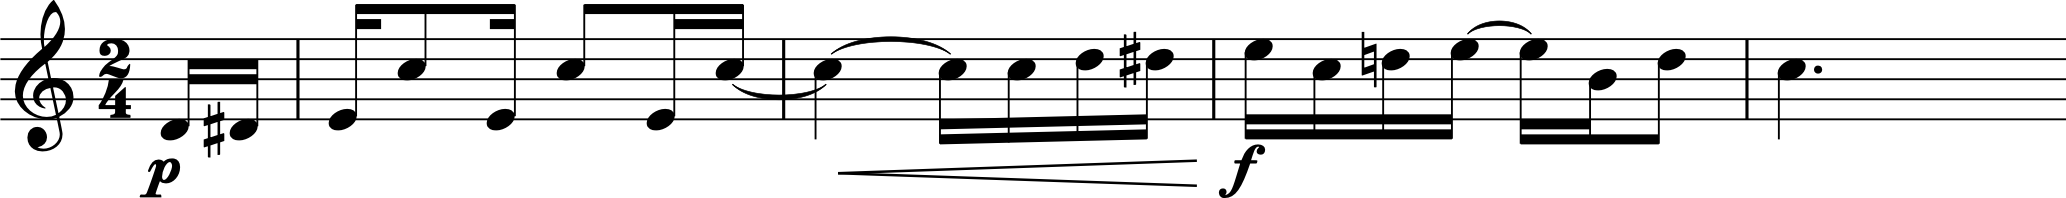 Score of the Entertainer